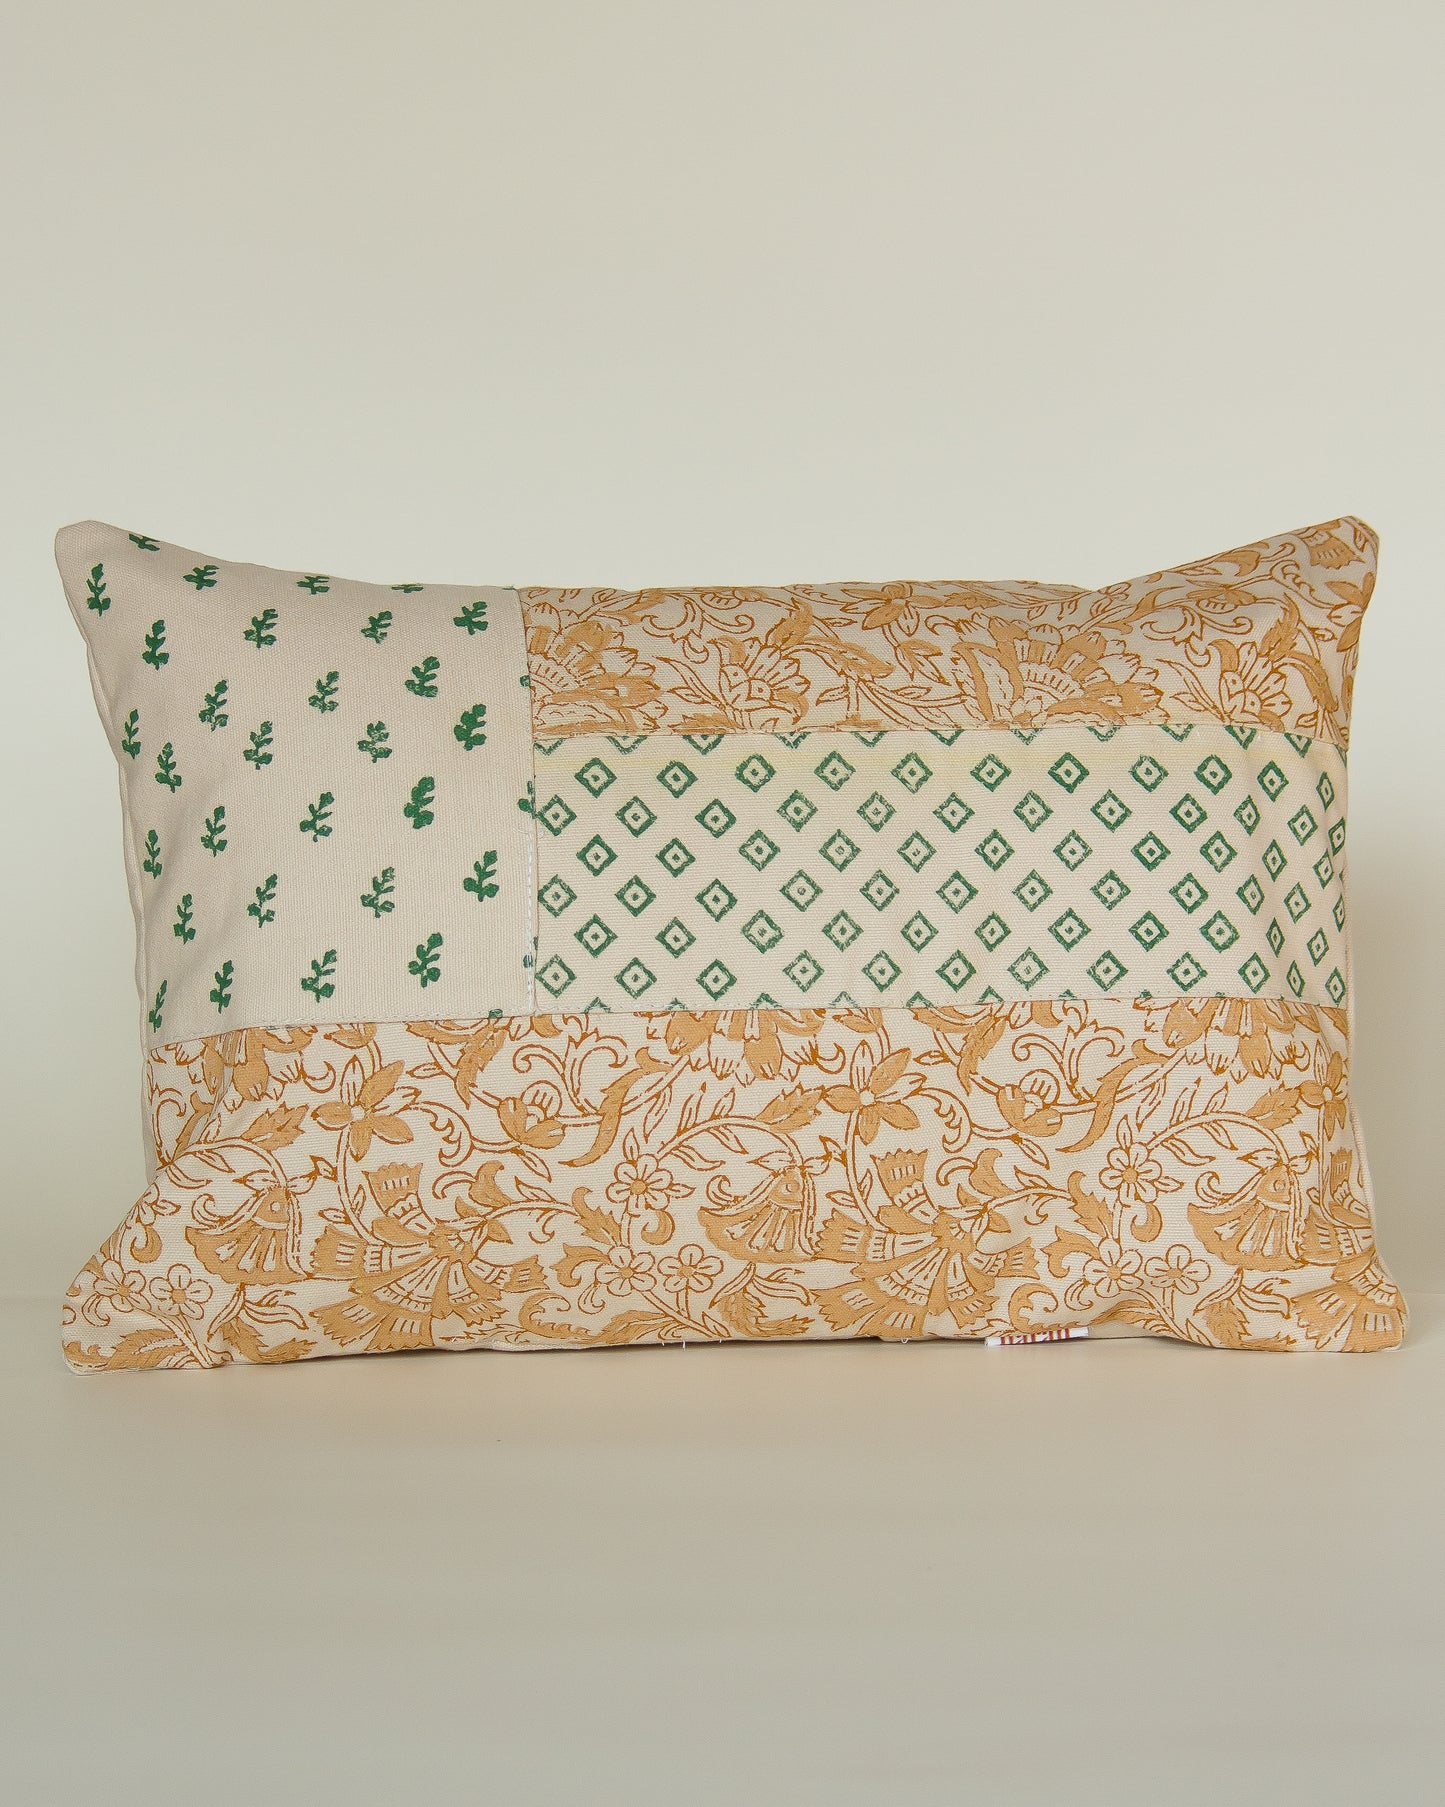 Patch Hand Block Printed Cushion Cover